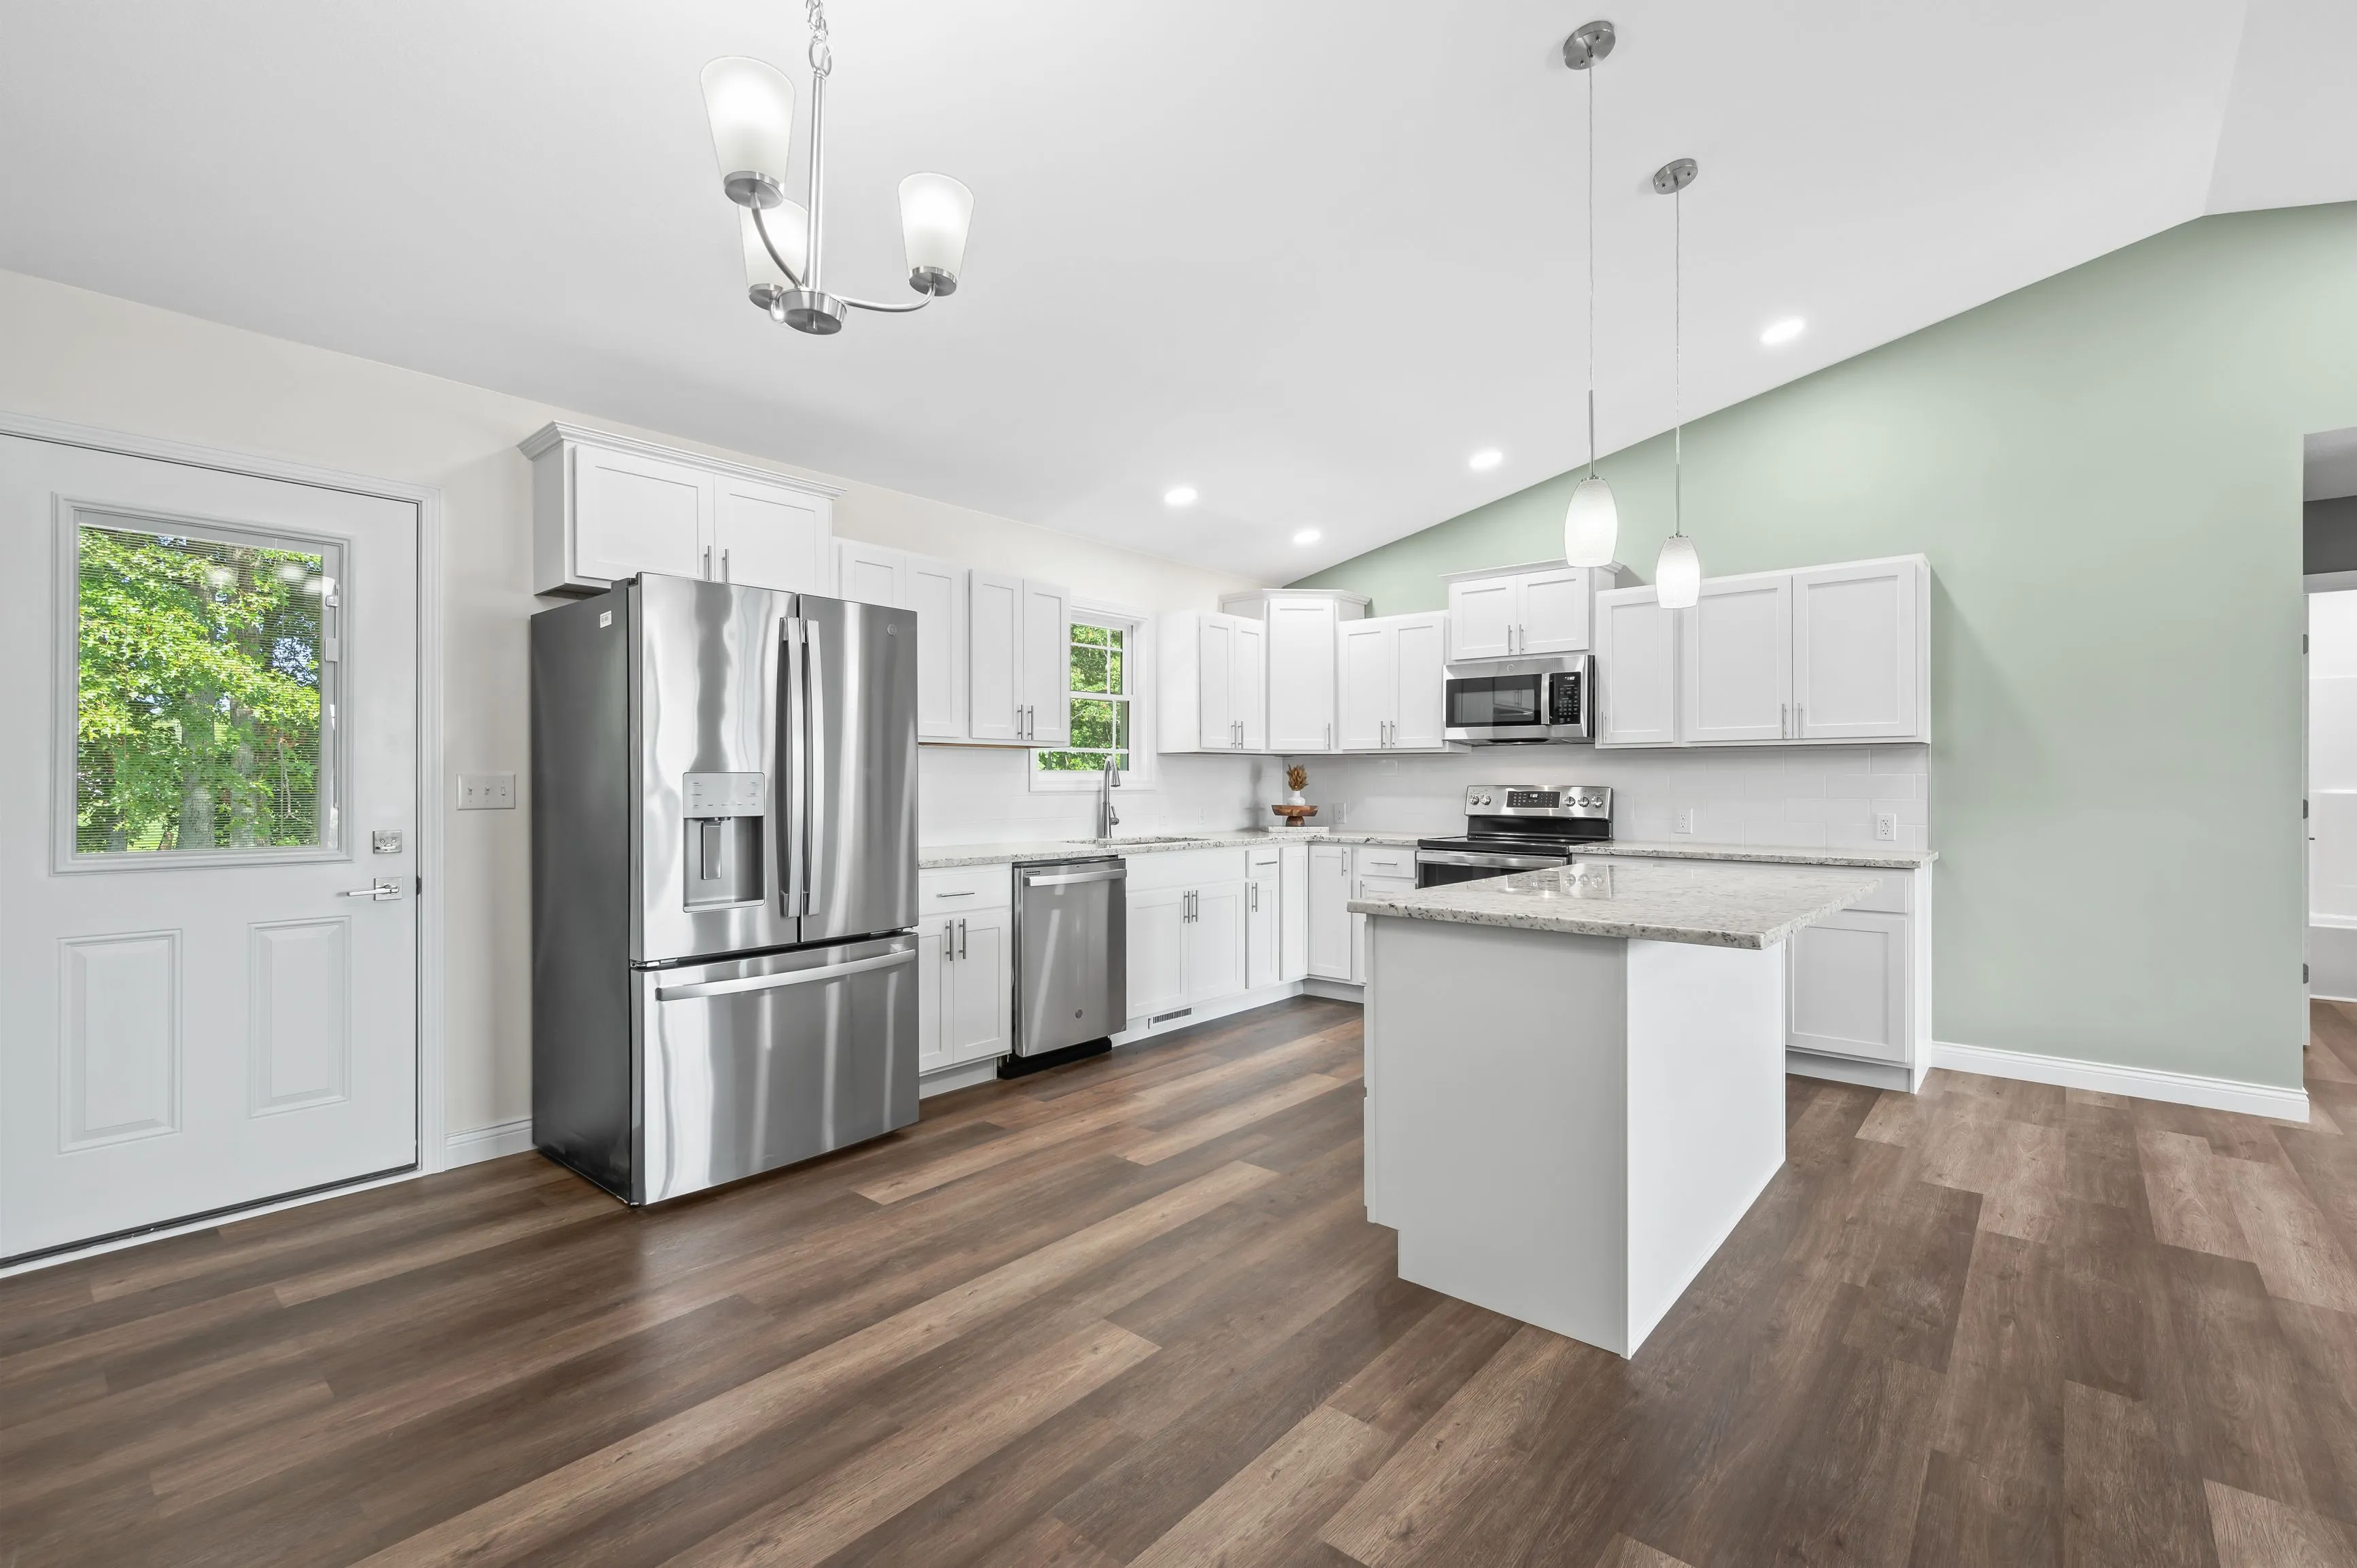 Spacious modern kitchen with white cabinetry, stainless steel appliances, and hardwood floors.